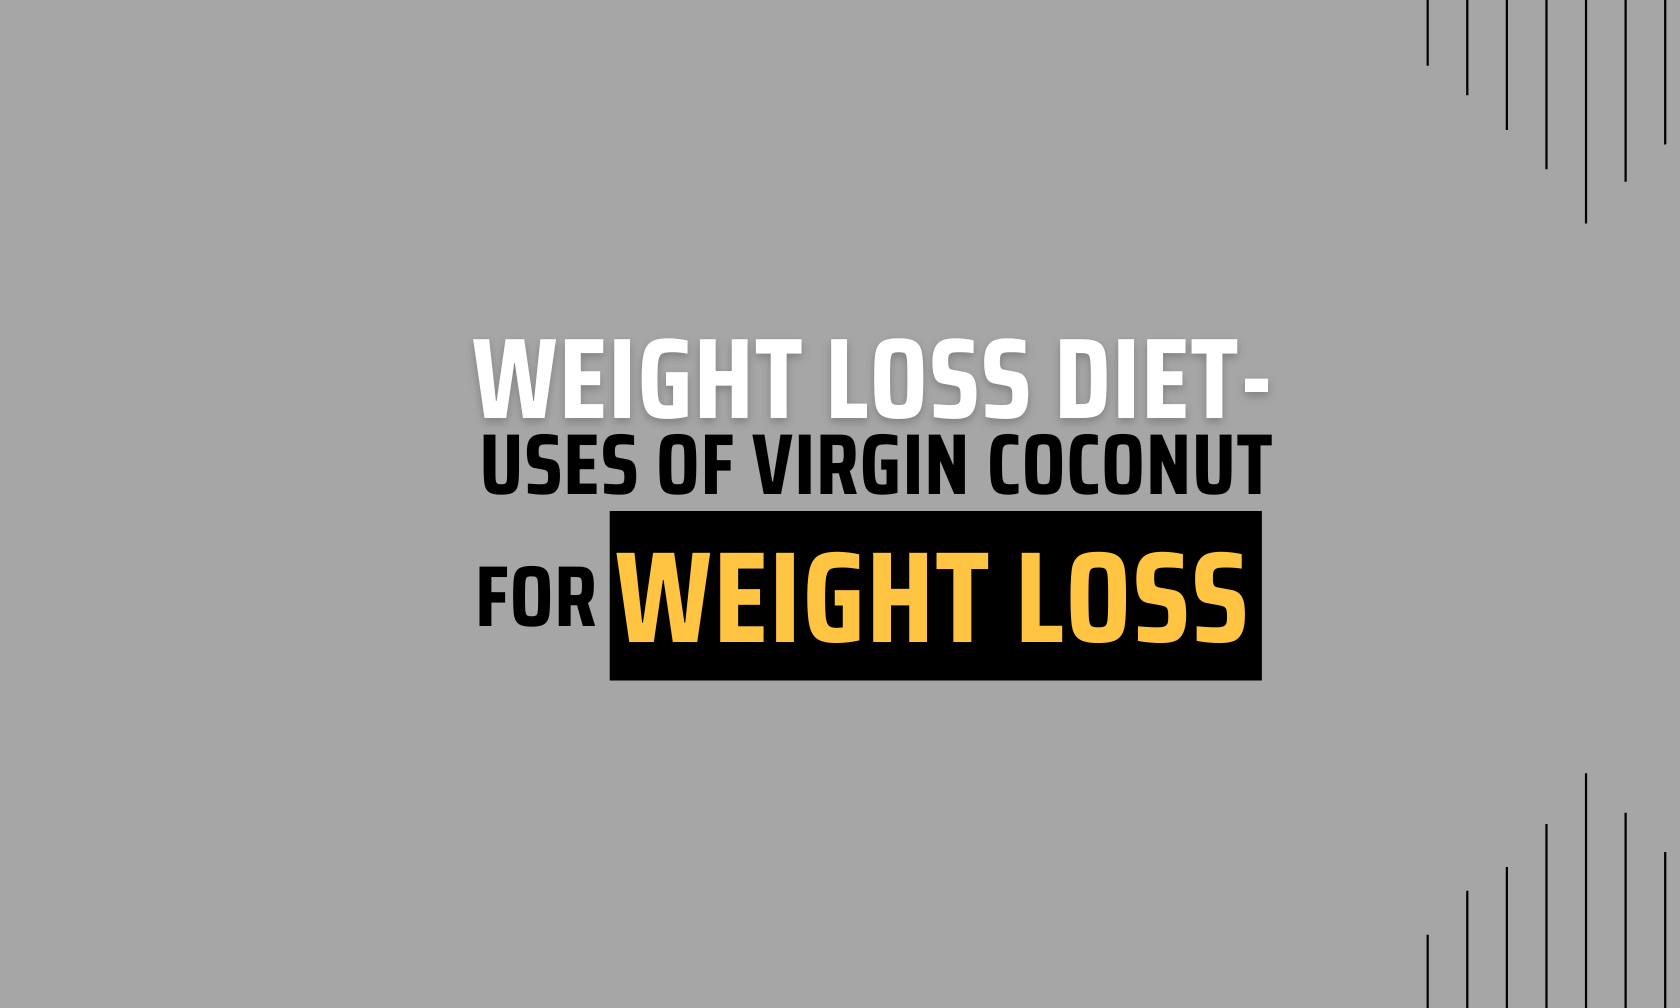 Virgin coconut oil for weight loss